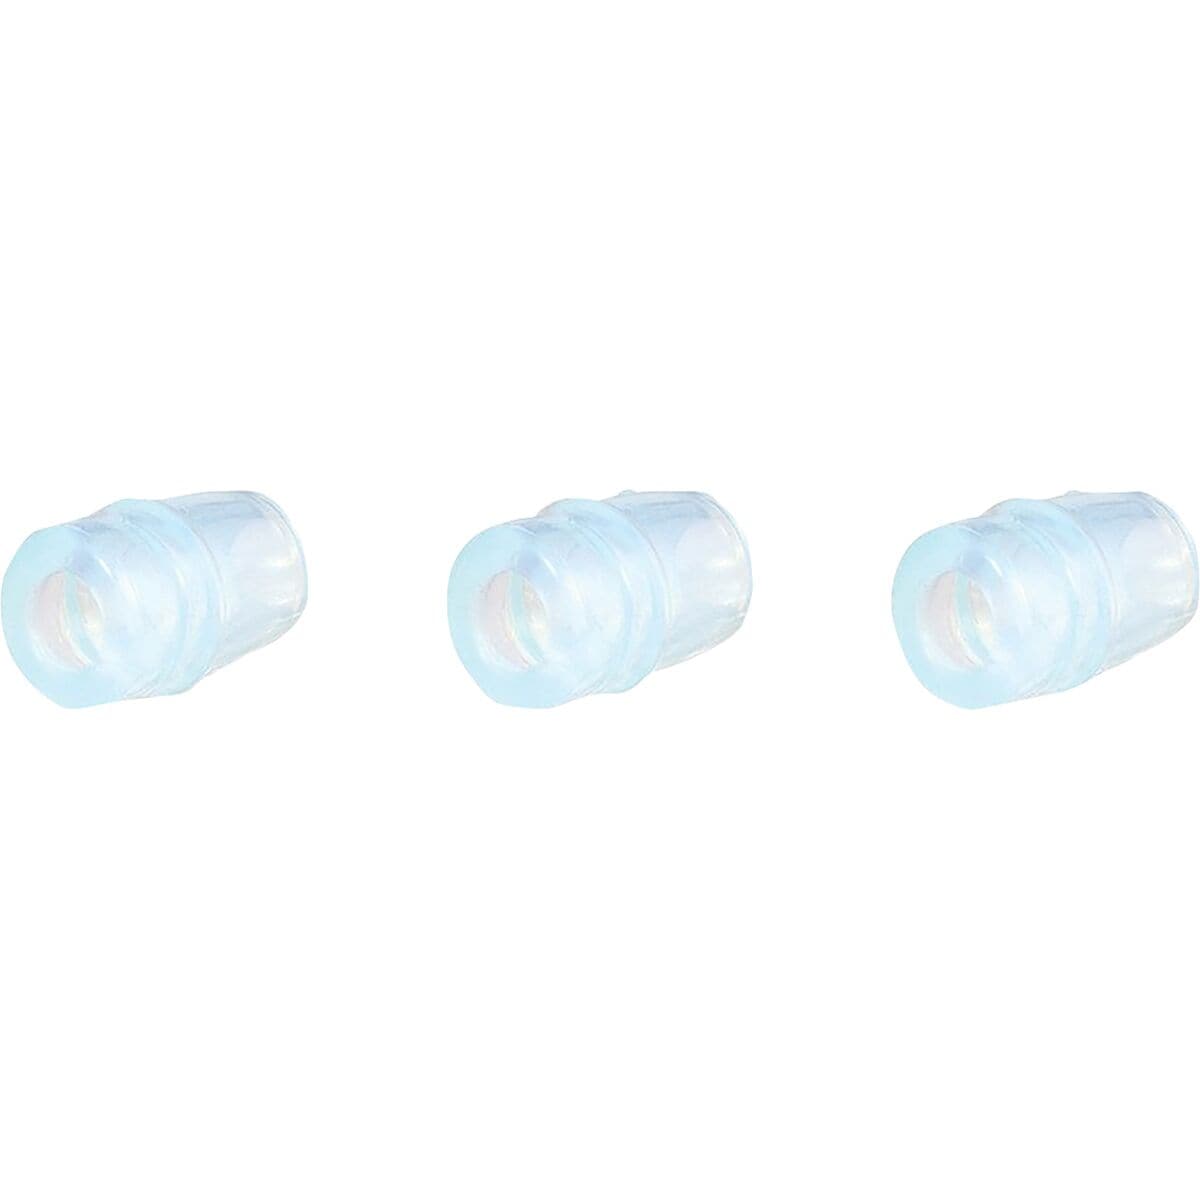 Osprey Packs Hydraulics Silicone Nozzle - 3-Pack